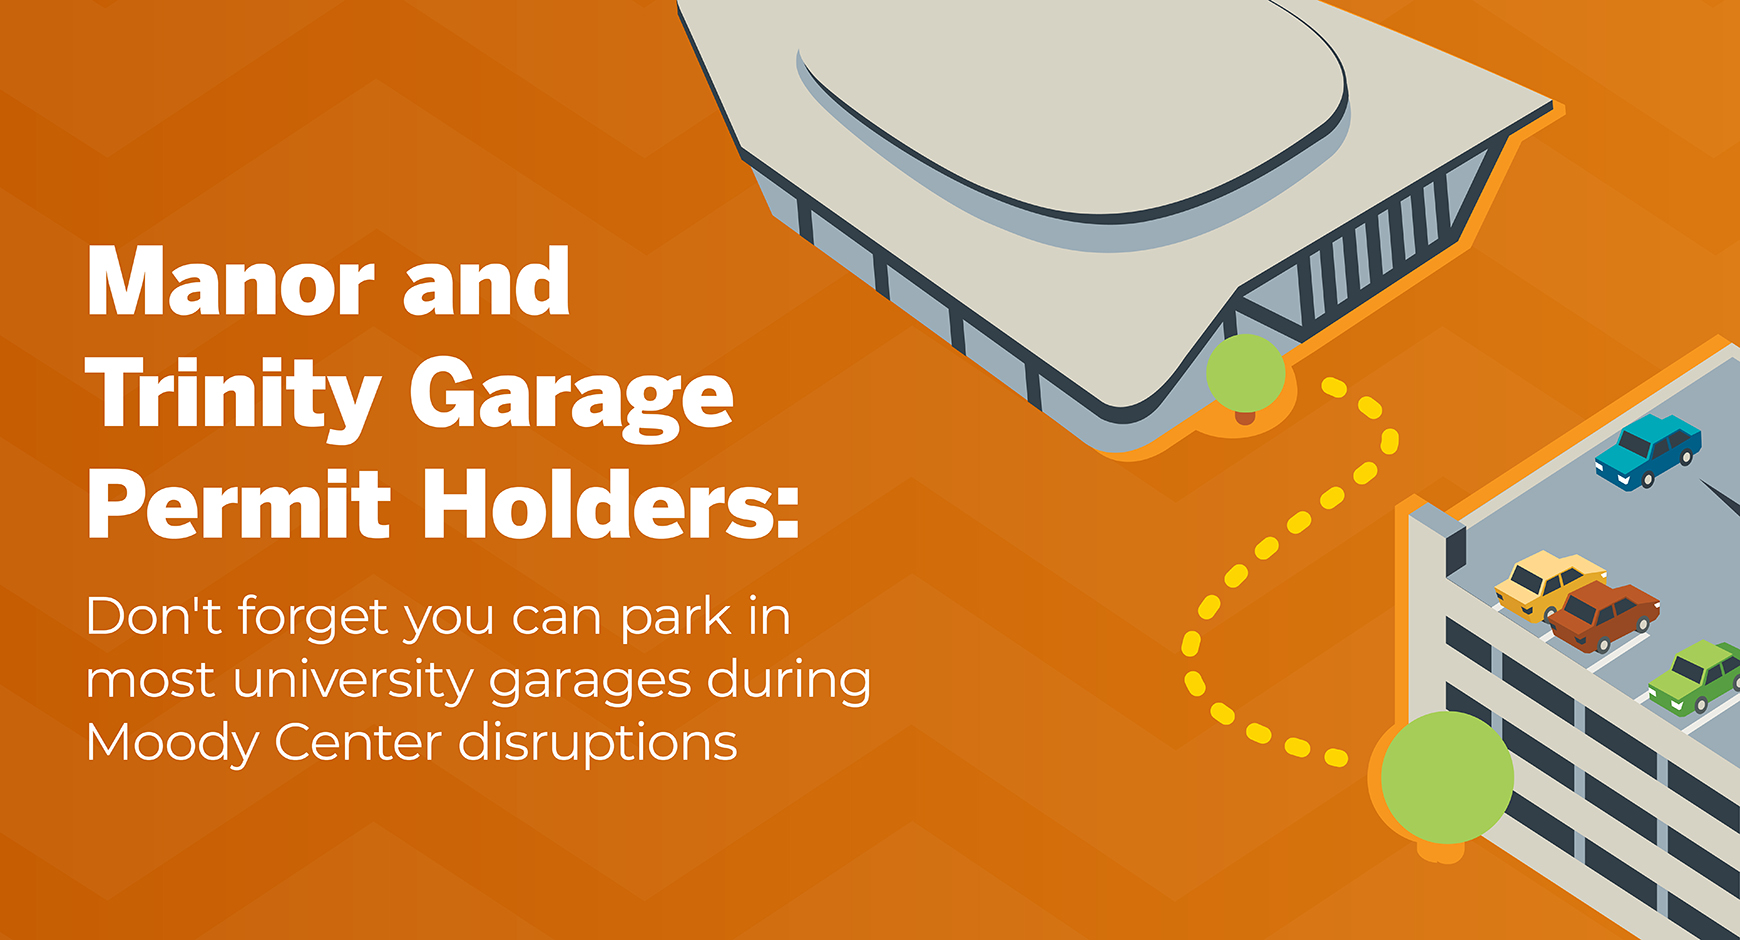 Manor and Trinity Garage Permit Holders: Don't forget you can park in most university garages during Moody Center disruptions